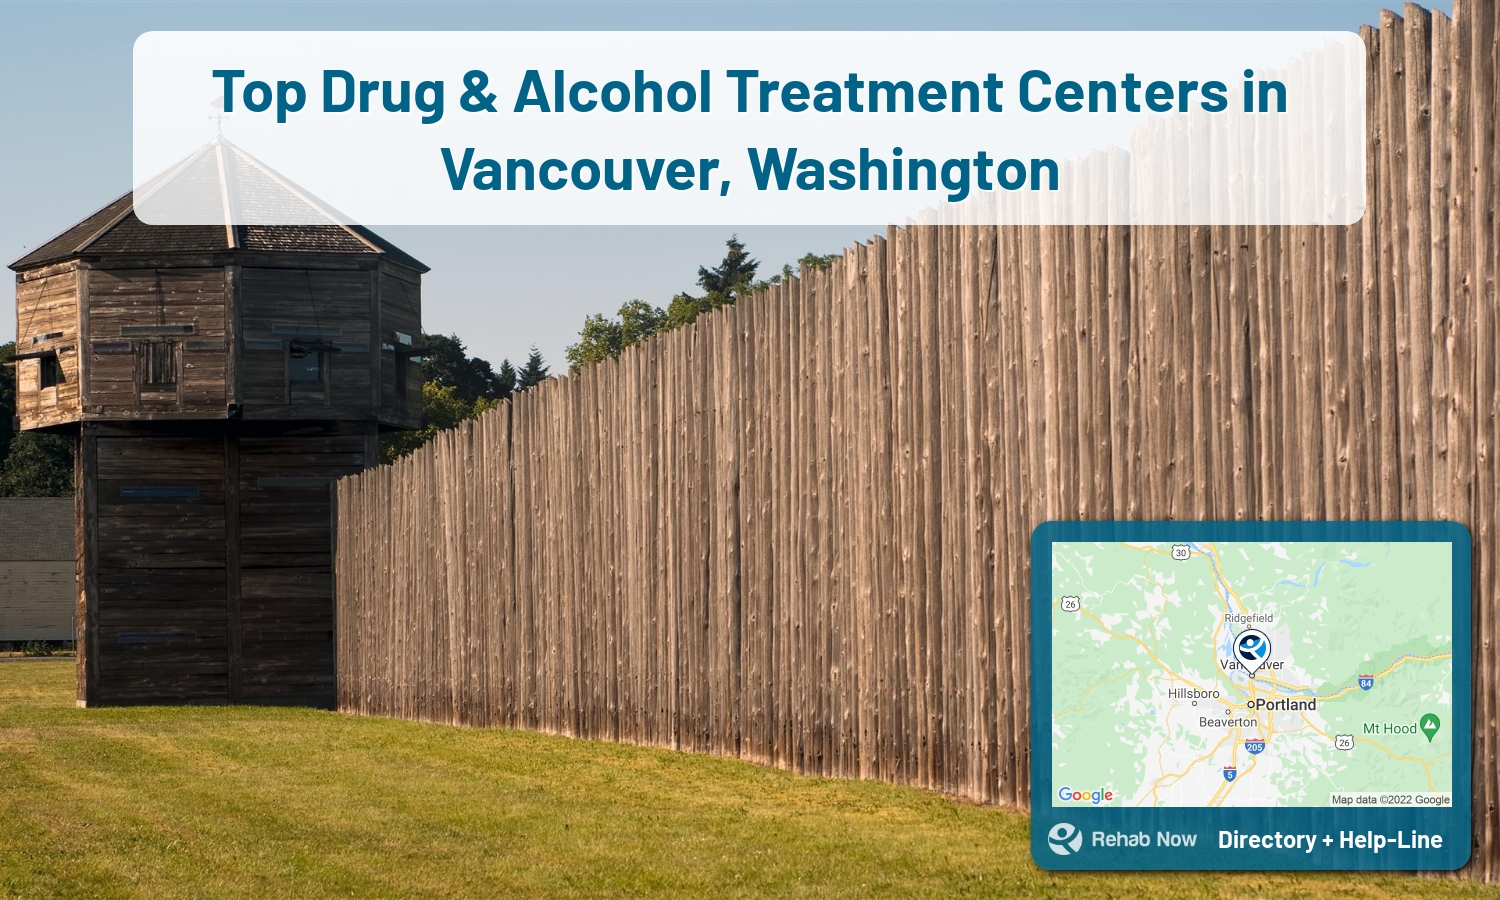 Ready to pick a rehab center in Vancouver? Get off alcohol, opiates, and other drugs, by selecting top drug rehab centers in Washington